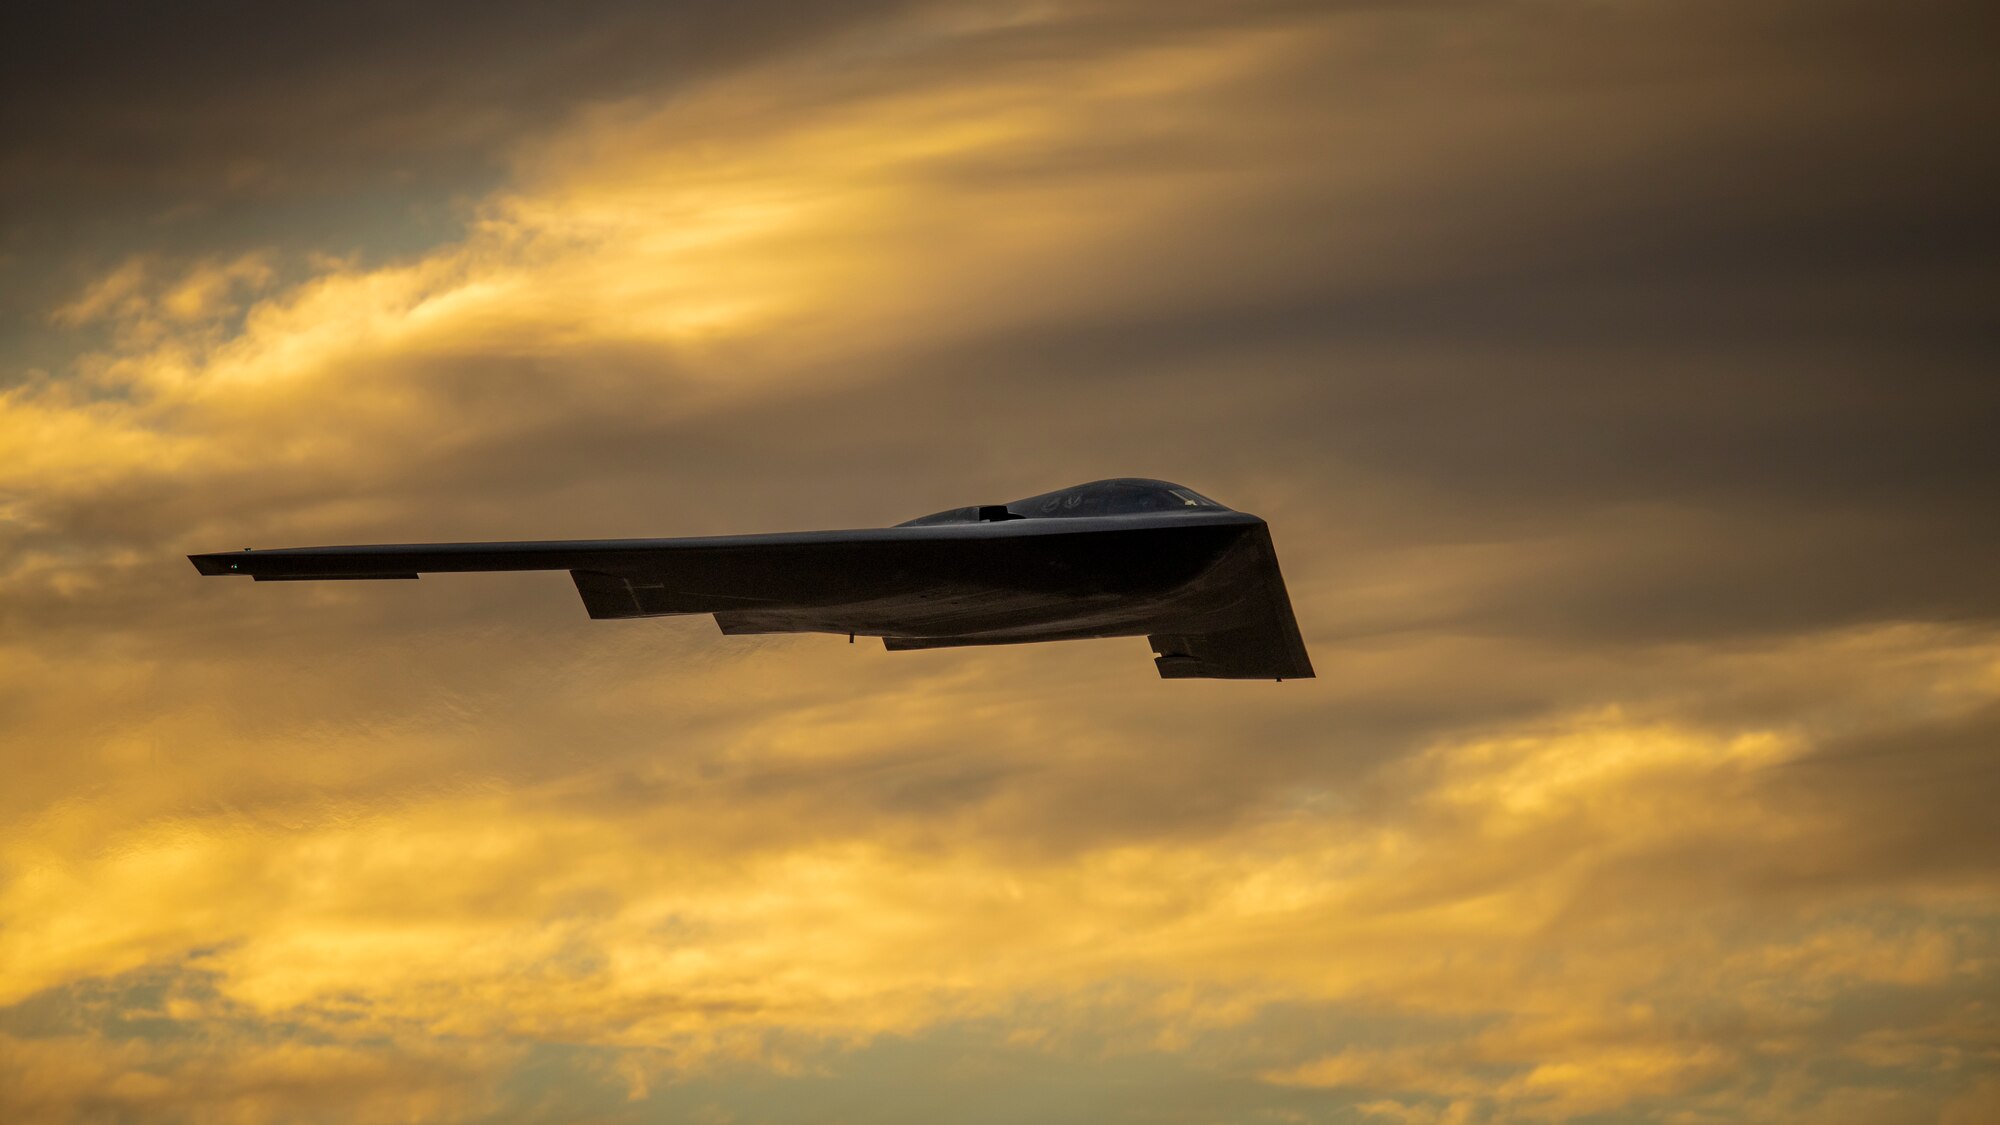 A U.S. Air Force B-2 Spirit bomber assigned to the 509th Bomb Wing, Whiteman Air Force Base, Missouri, flies over Luke Air Force Base, Arizona, Nov. 15, 2022.